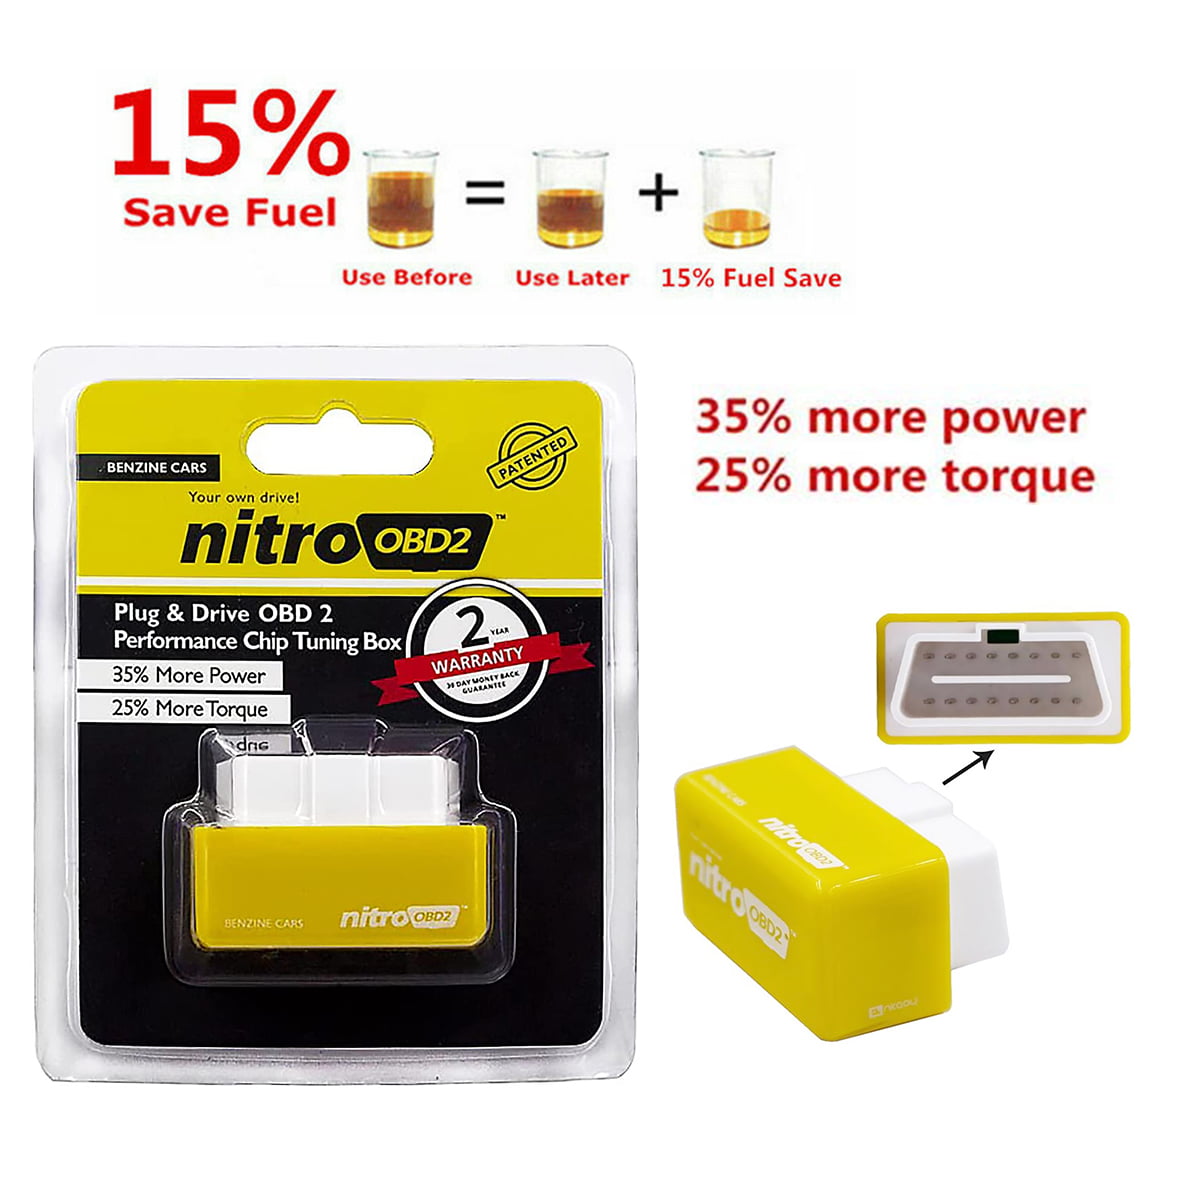 Yellow-Eco Plug and Drive Nitro OBD2 Performance Chip Tuning Box for Petrol Cars 